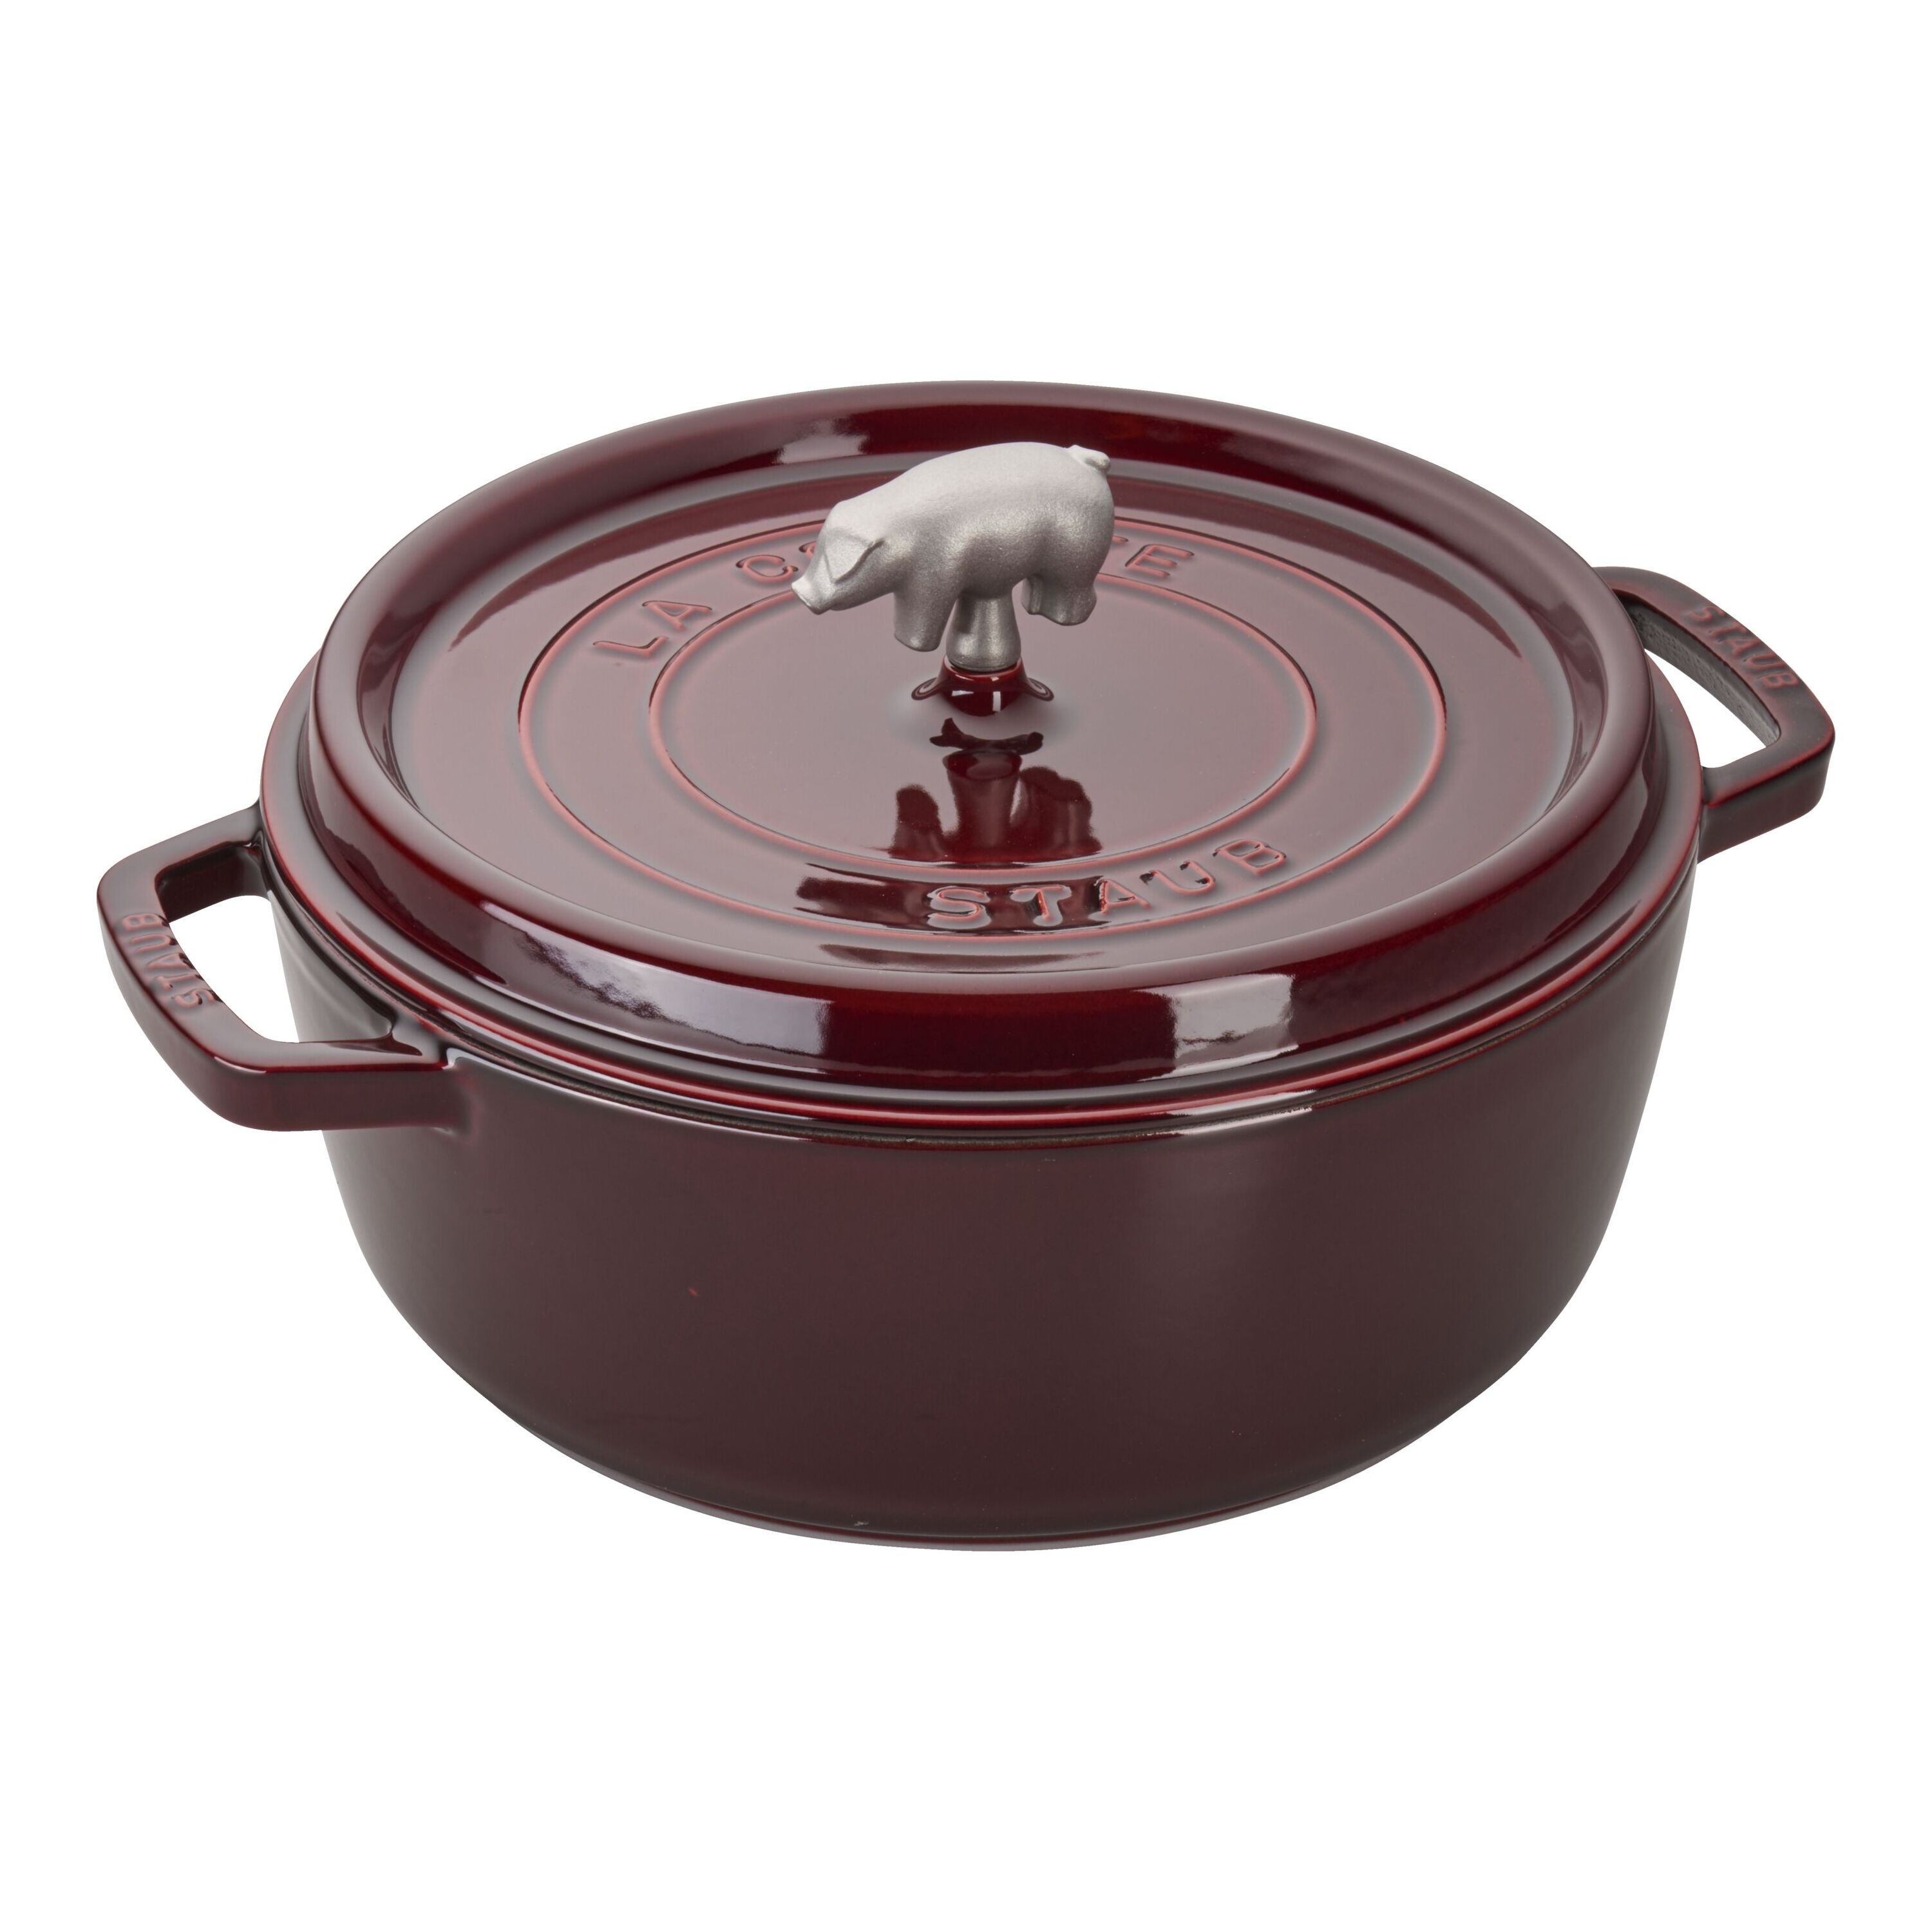 Best Choice Products 6qt Non-Stick Enamel Cast-Iron Dutch Oven for Baking, Braising, Roasting w/ Side Handles - Red